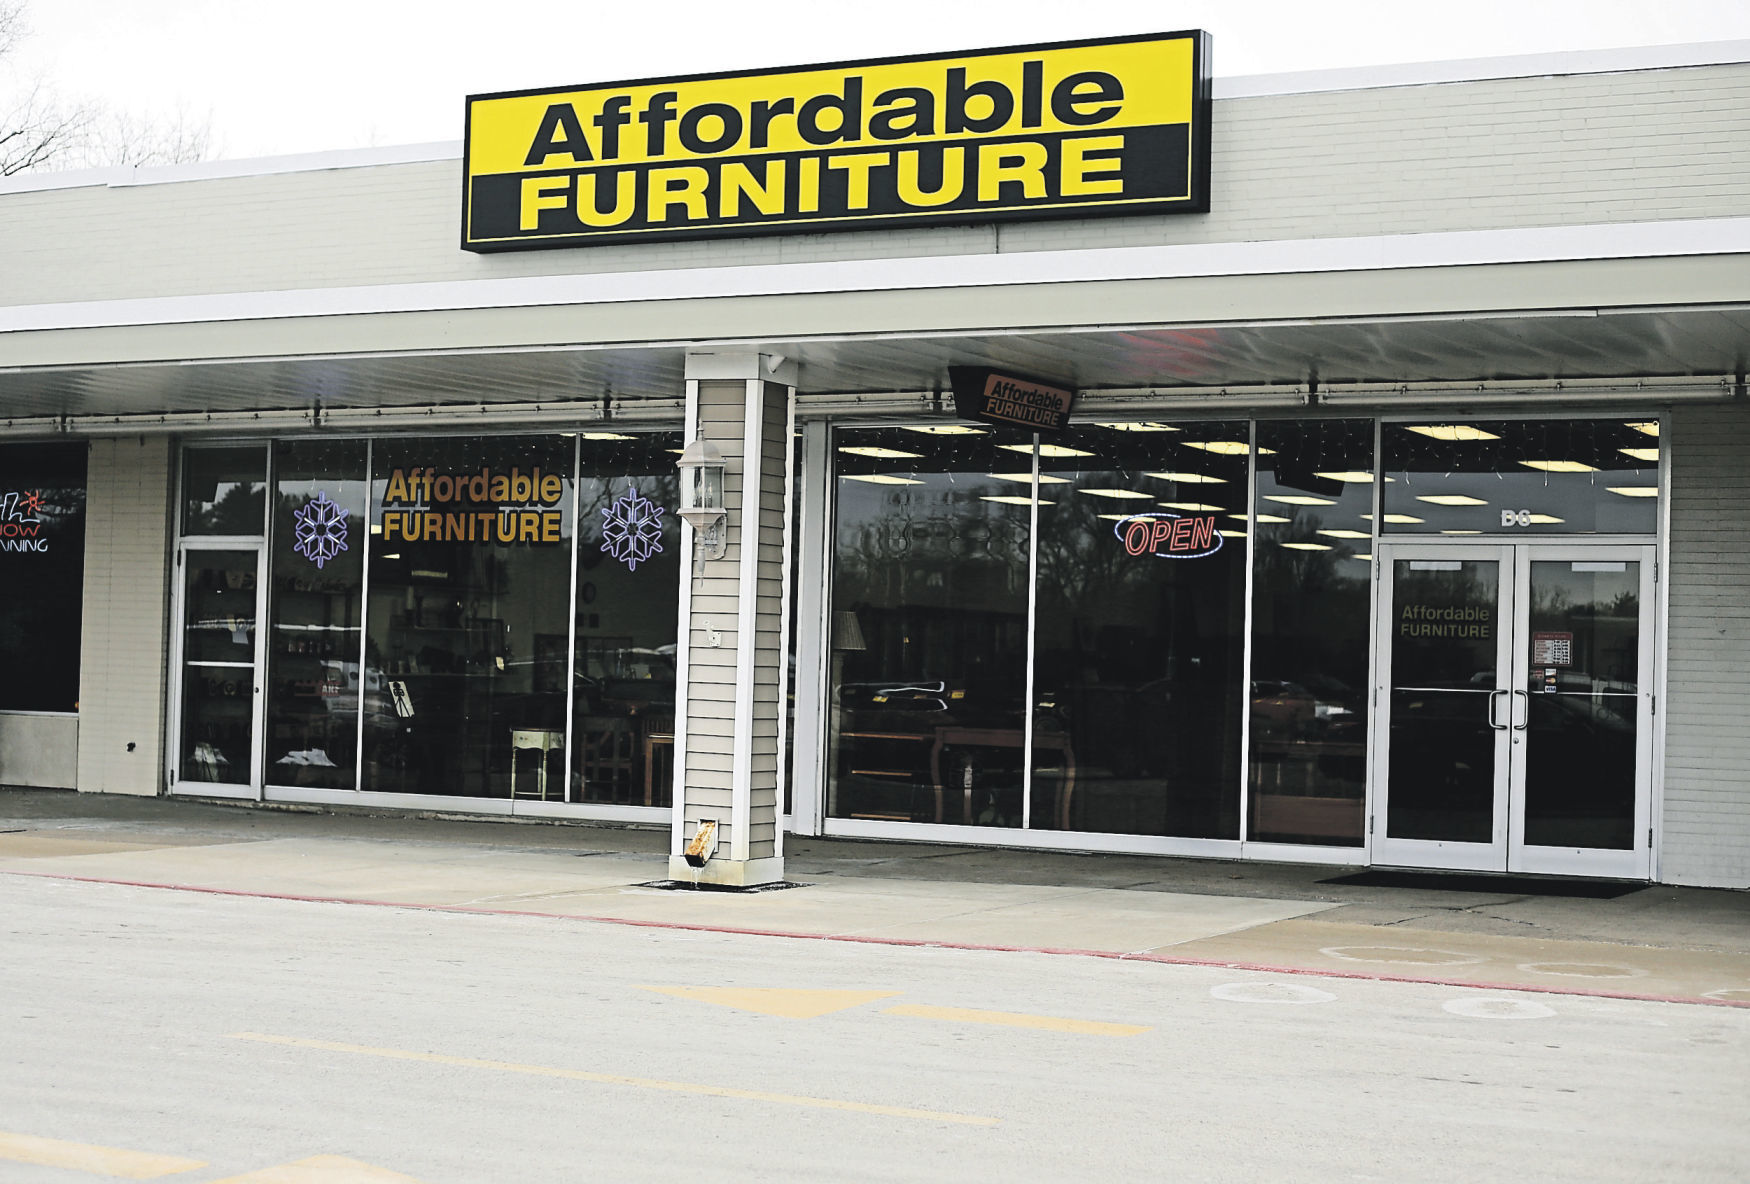 Affordable Furniture in Dubuque. PHOTO CREDIT: EILEEN MESLAR